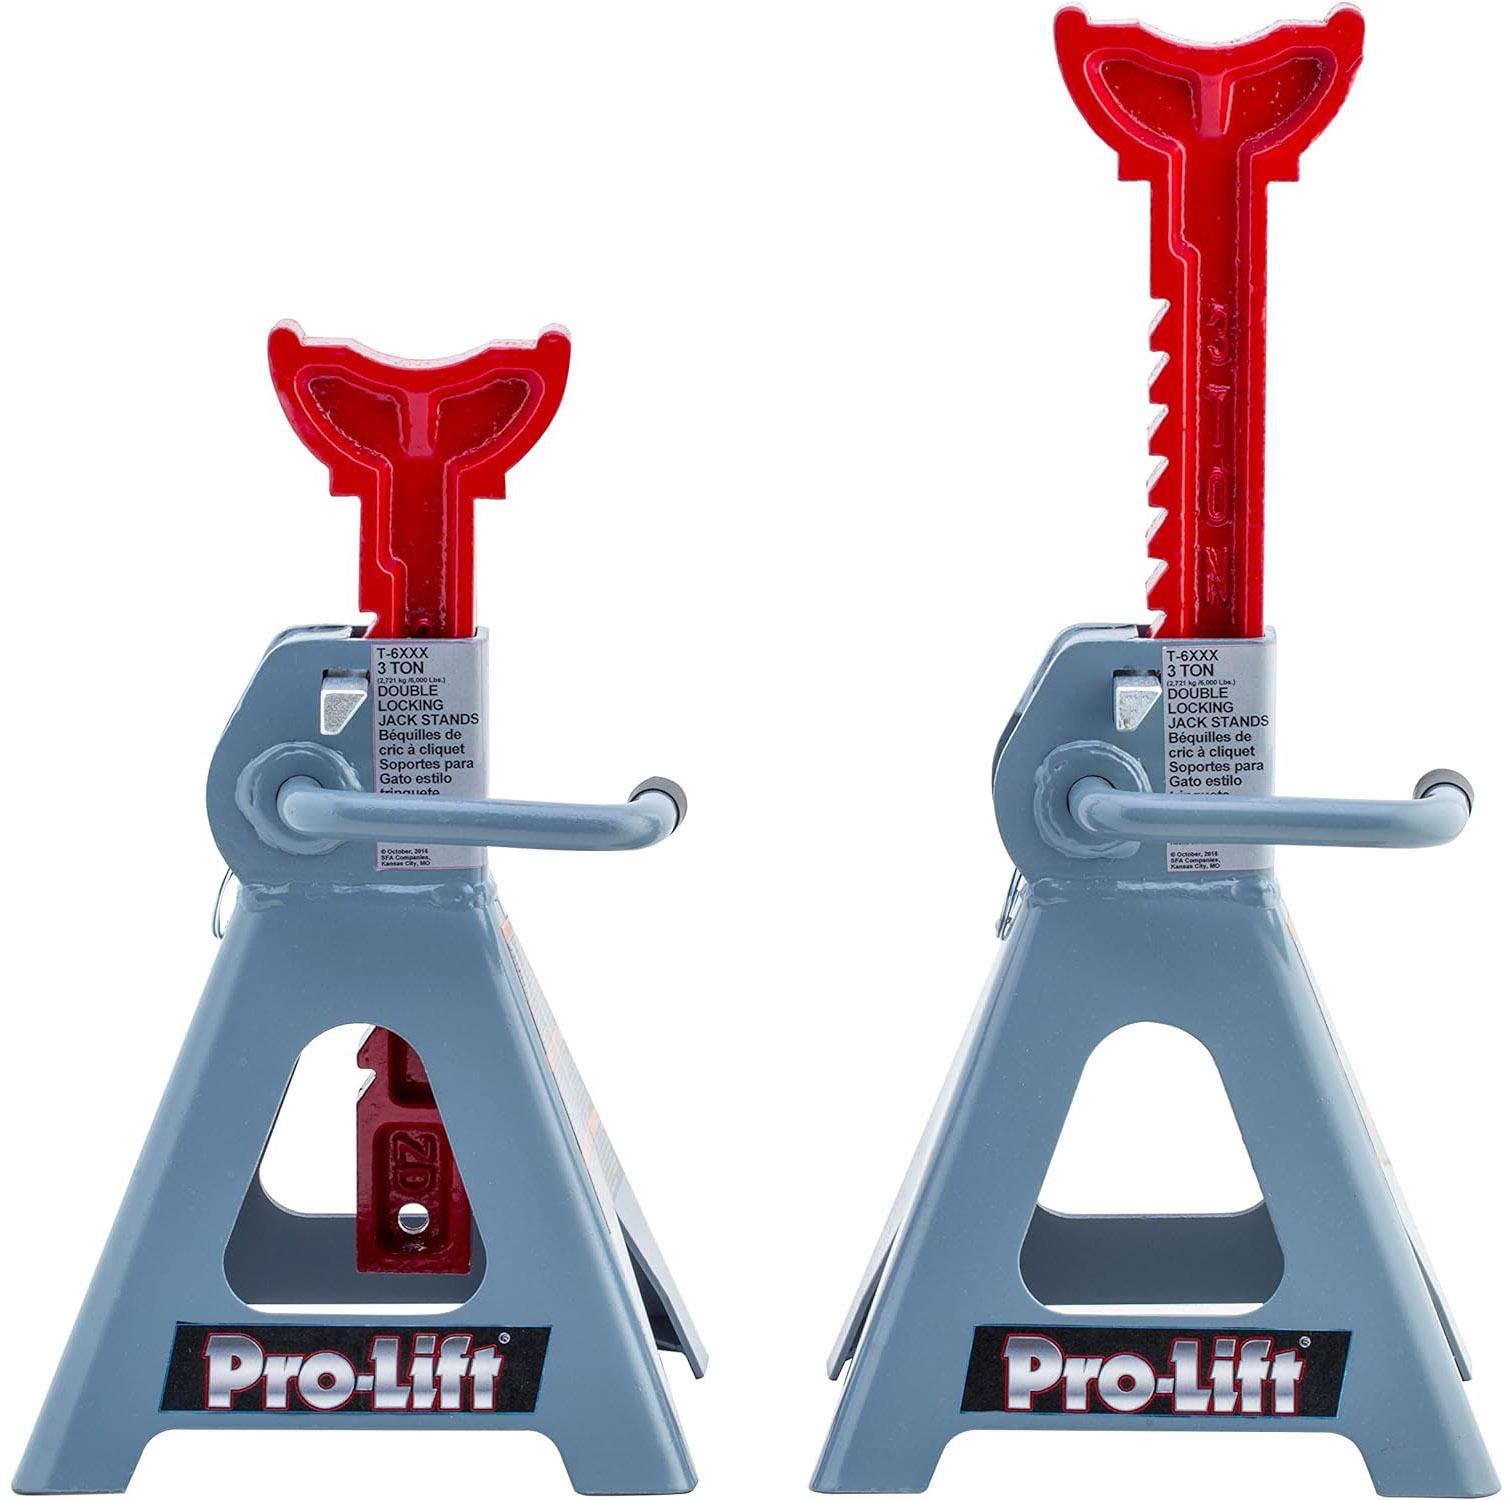 Pro-Lift 3-Ton T-6903D Double Pin Jack Stands for $29.39